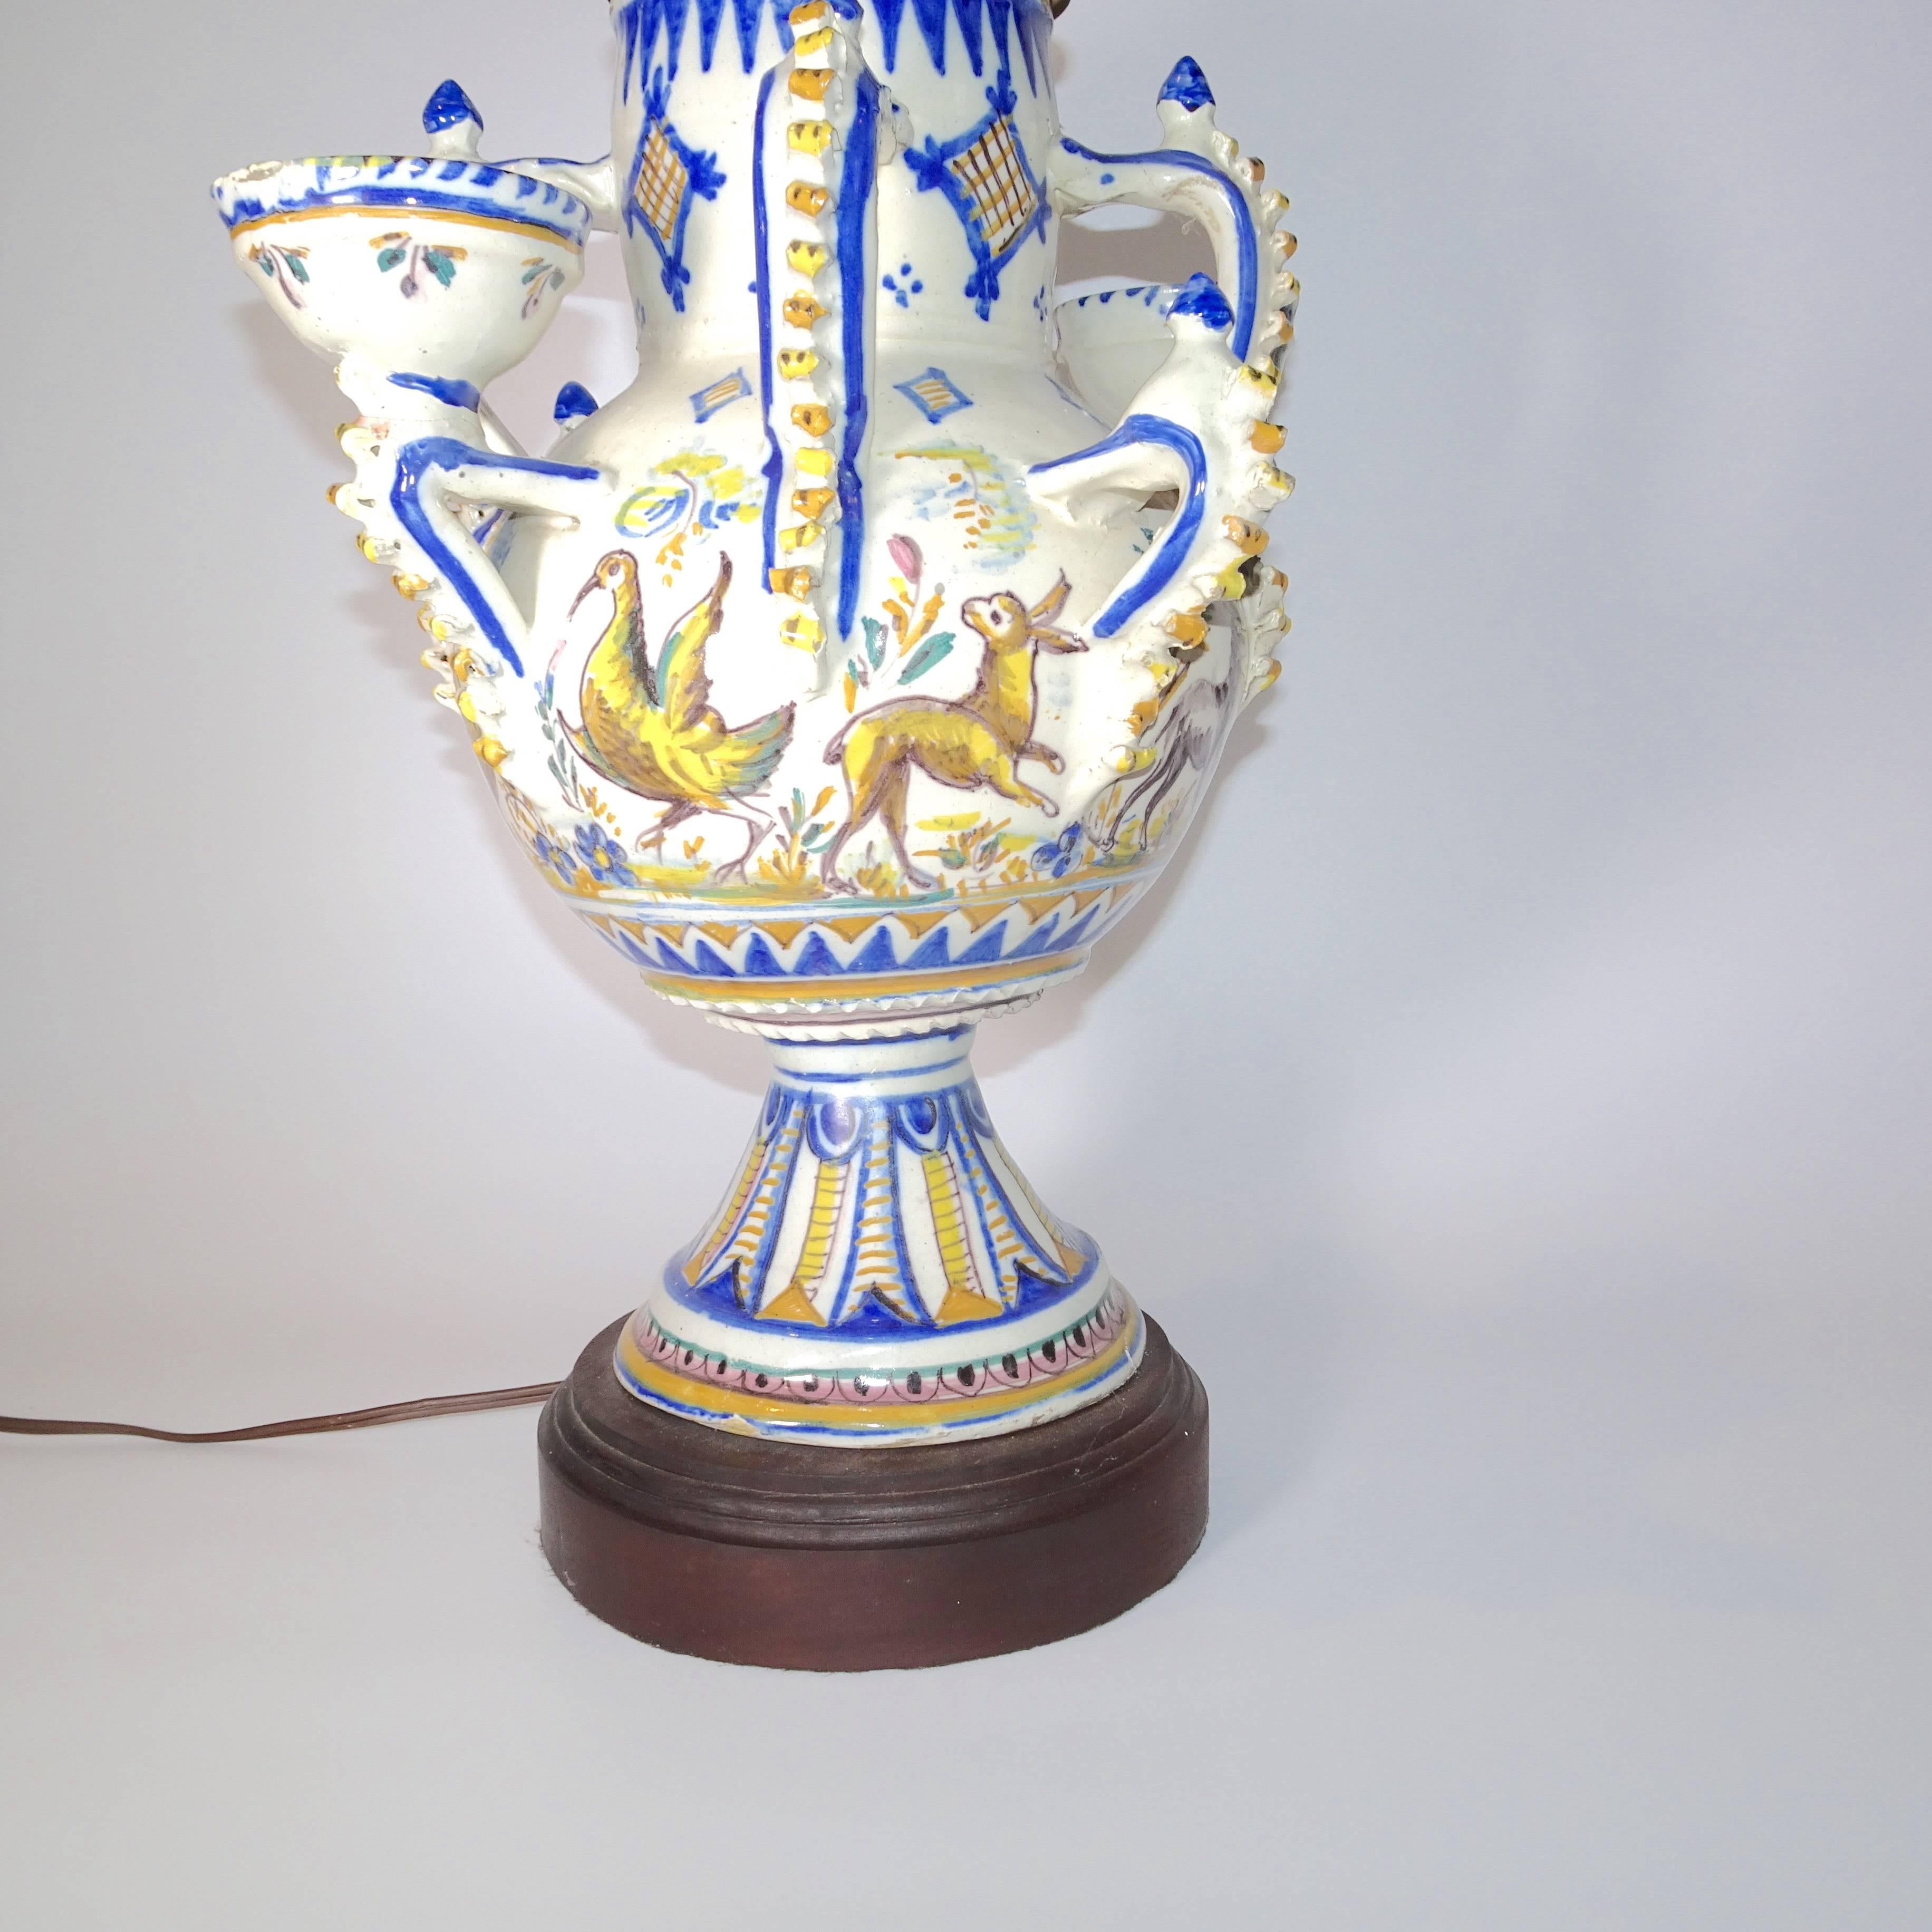 This 19th century blue and white delft table lamp with four handles and two small bowls. The pattern on the delft lamp has animals and a stylized pattern in shade of blue and gold.  A shade is available is you want to ship separately.  A nice finial